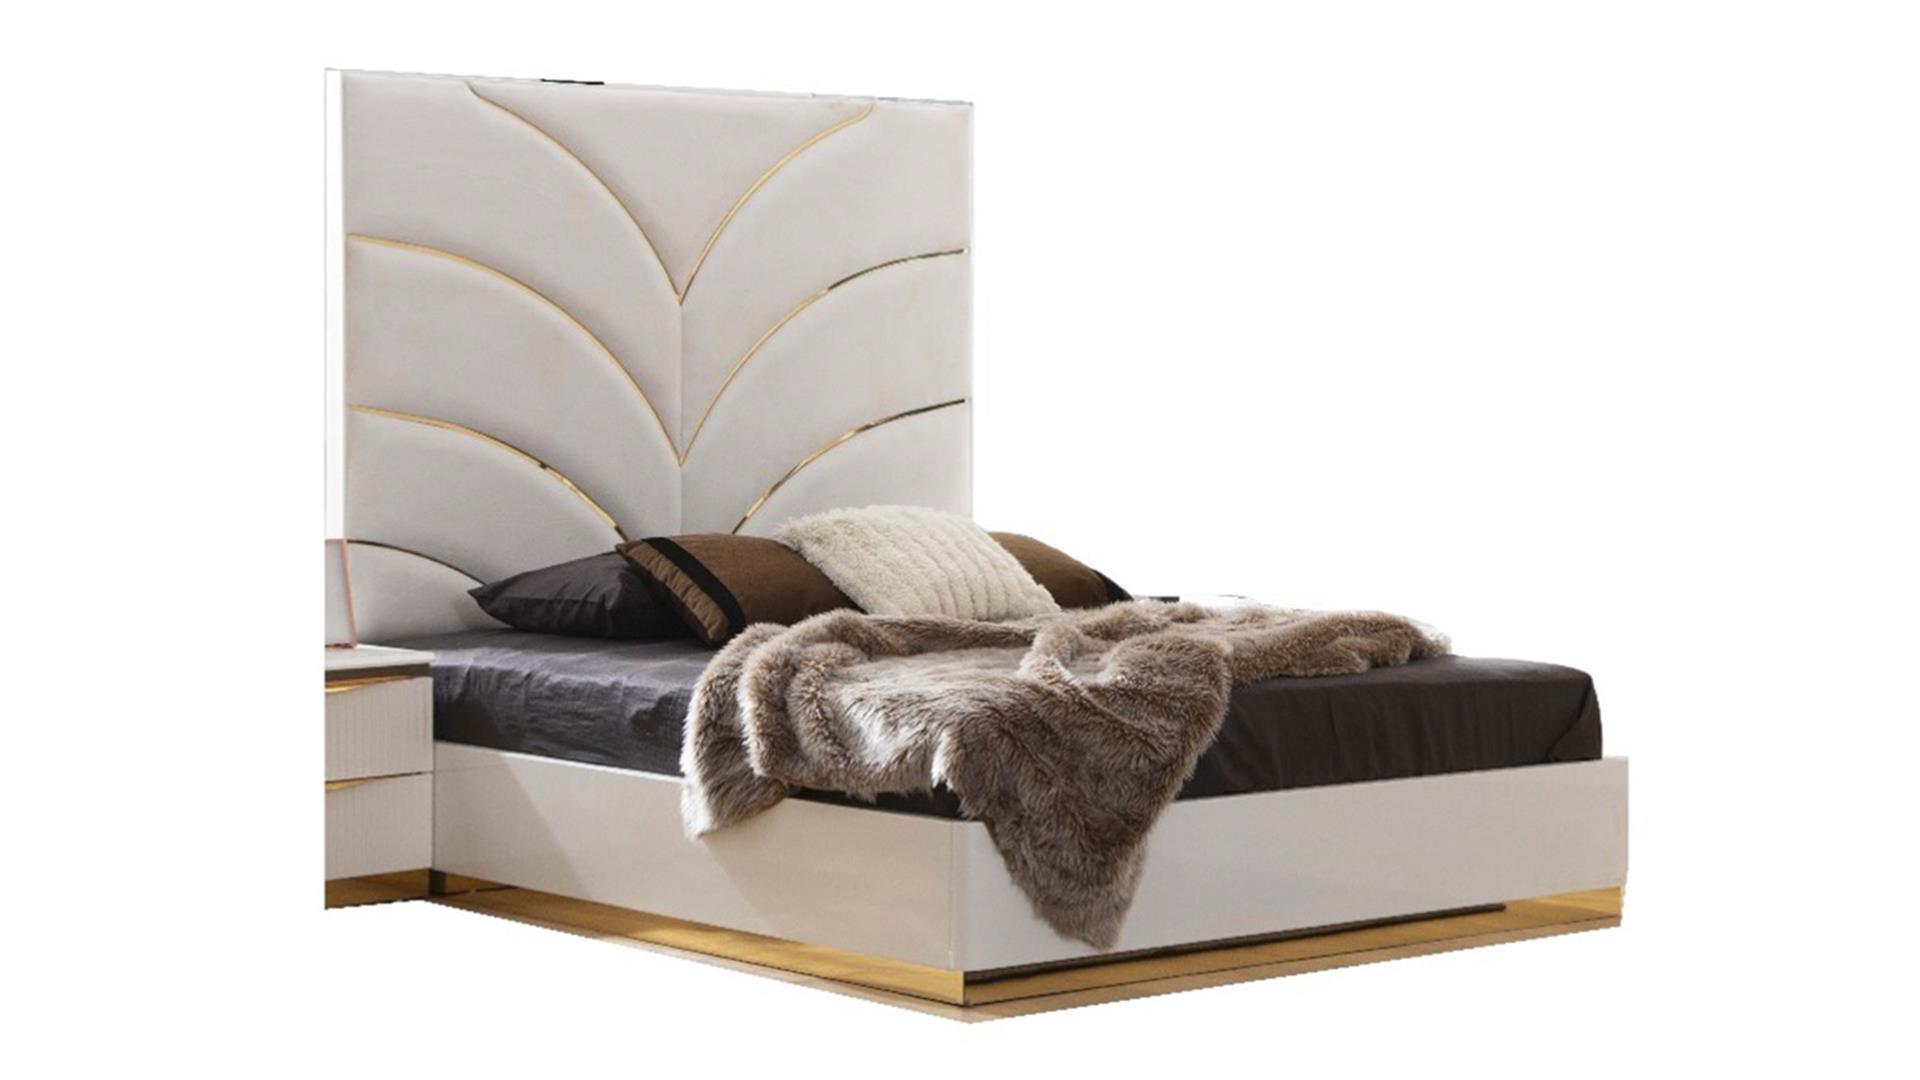 

    
Glam White & Gold King Bed Set 6Pcs LAURA Galaxy Home Contemporary Luxury
